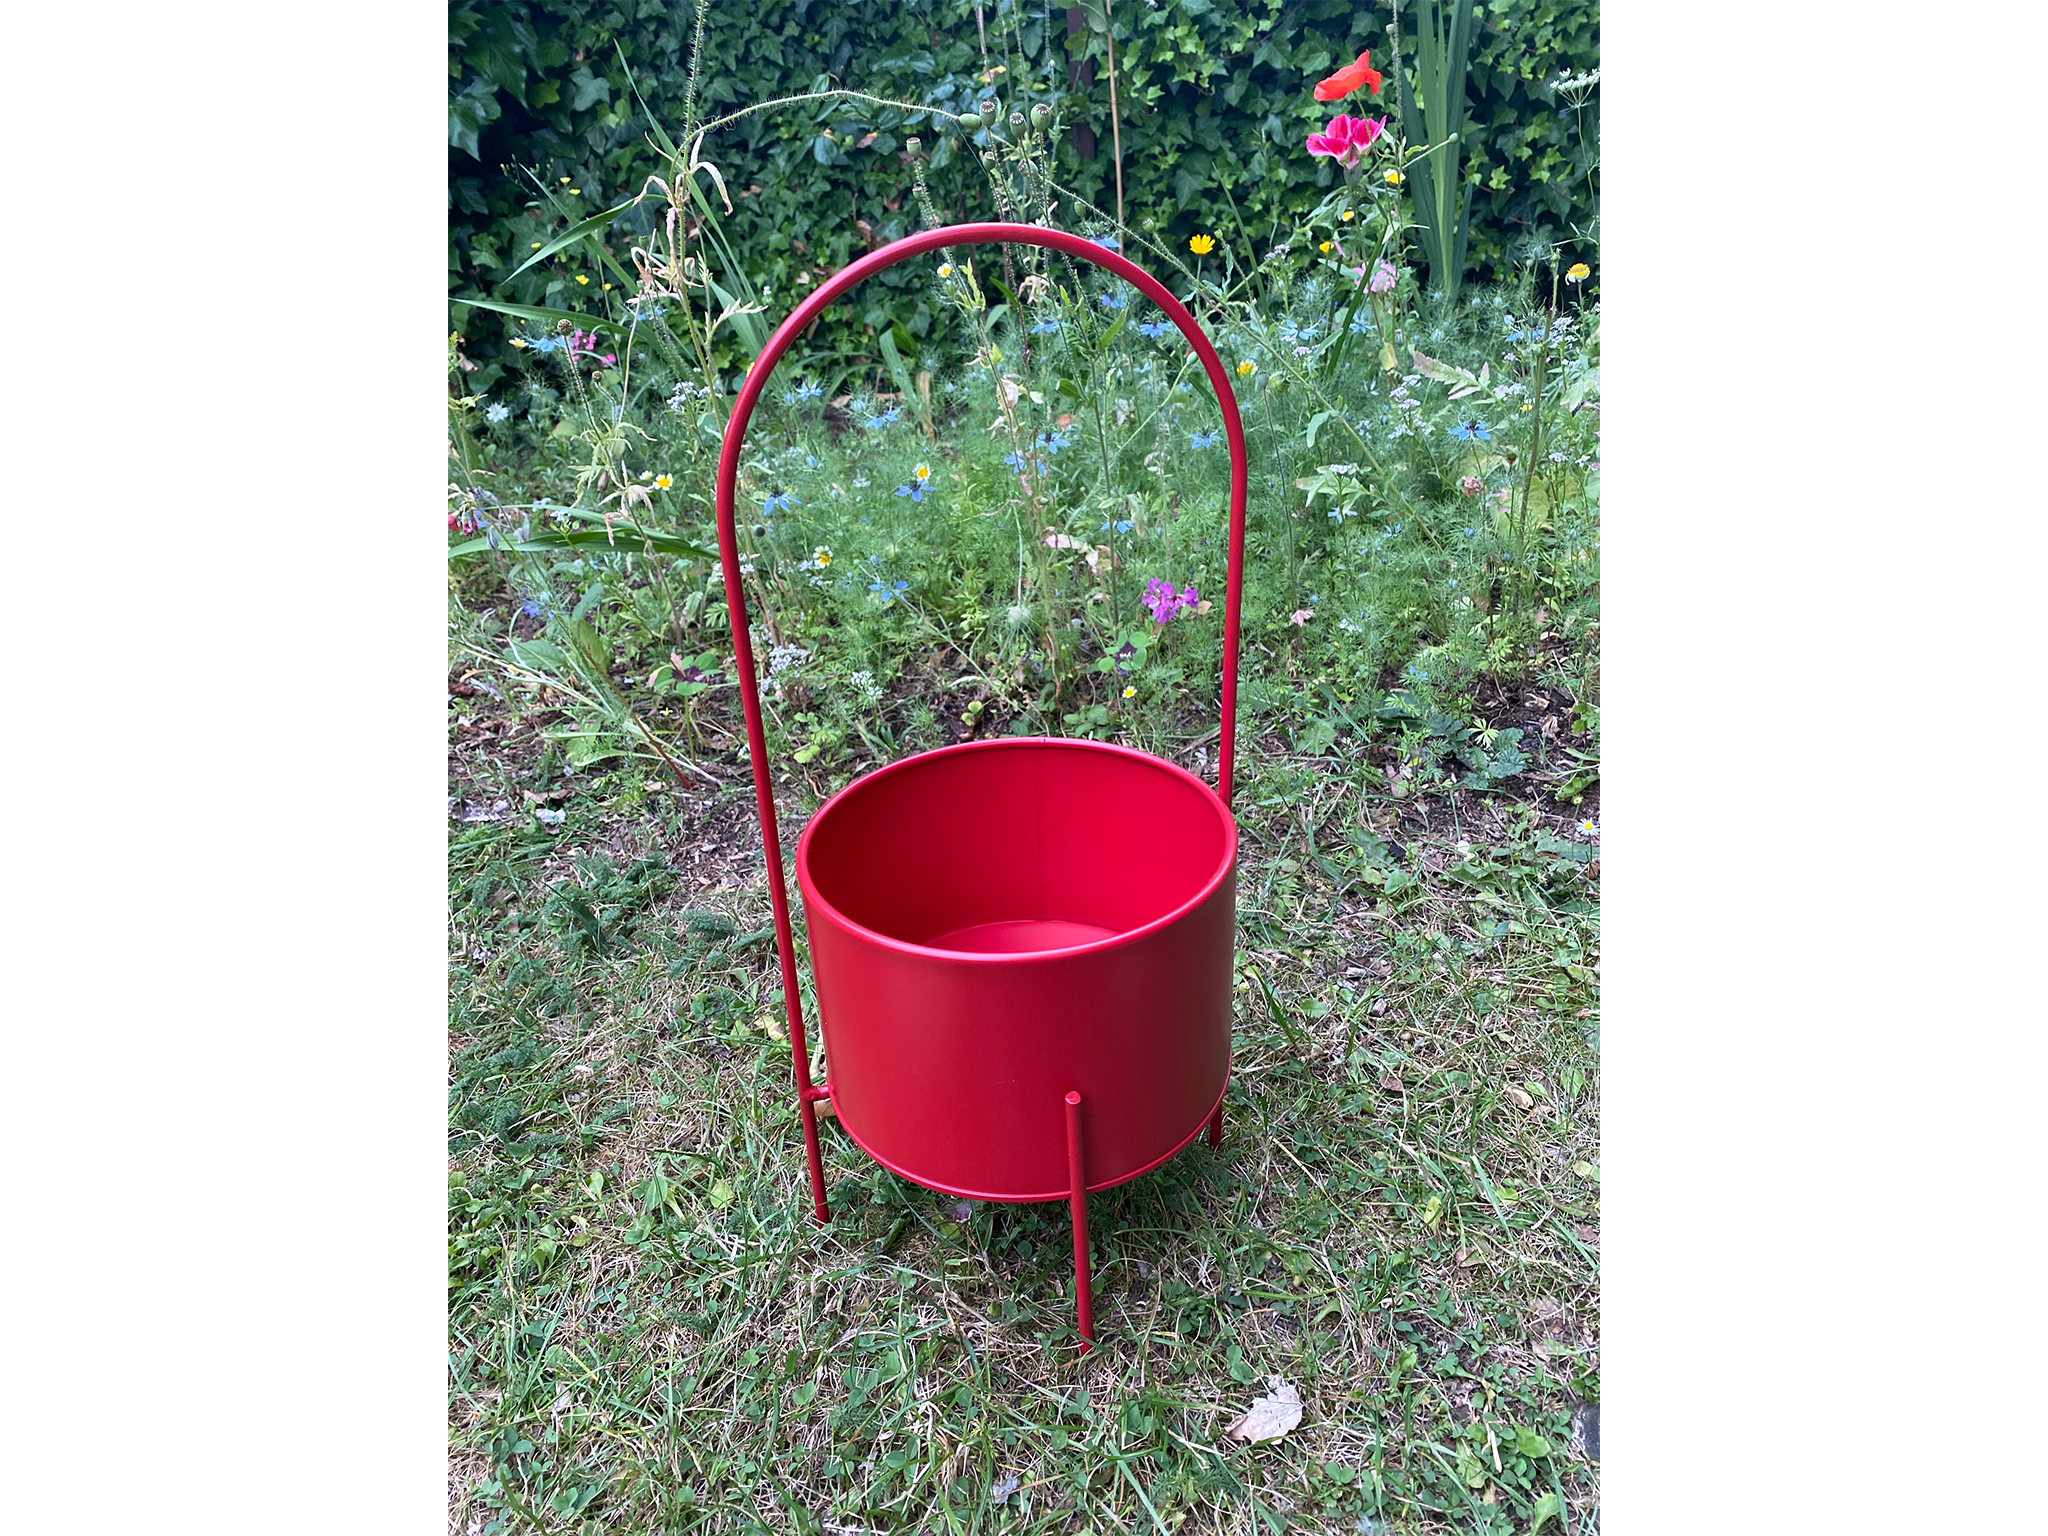 Sazy motley planter in red